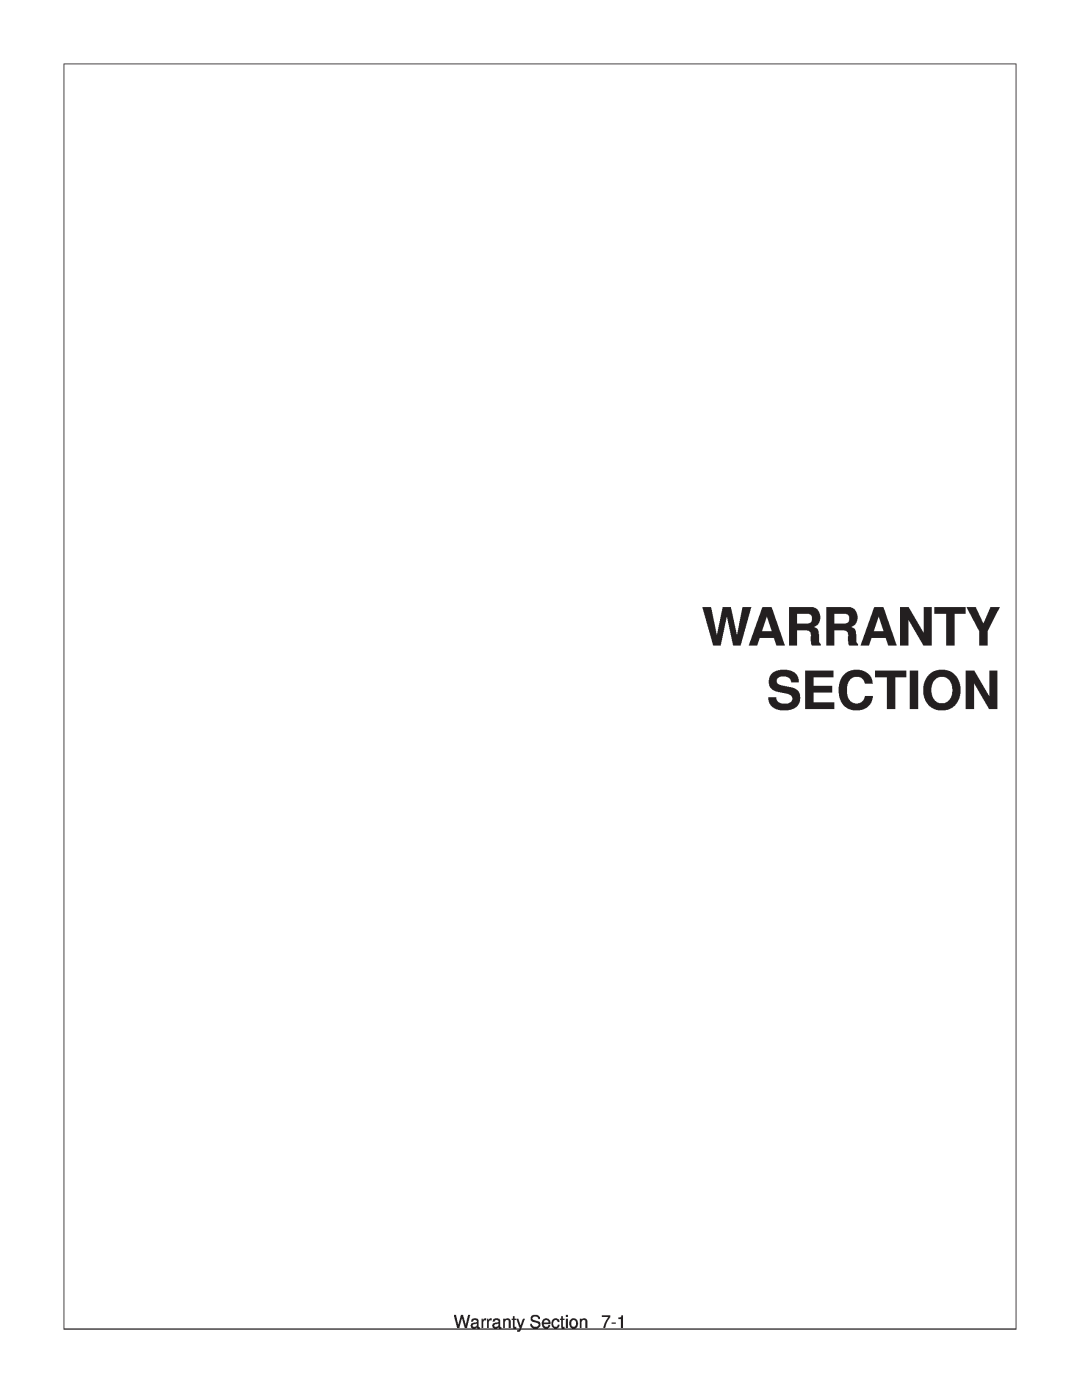 Tiger Products Co., Ltd 6020009 manual Warranty Section 